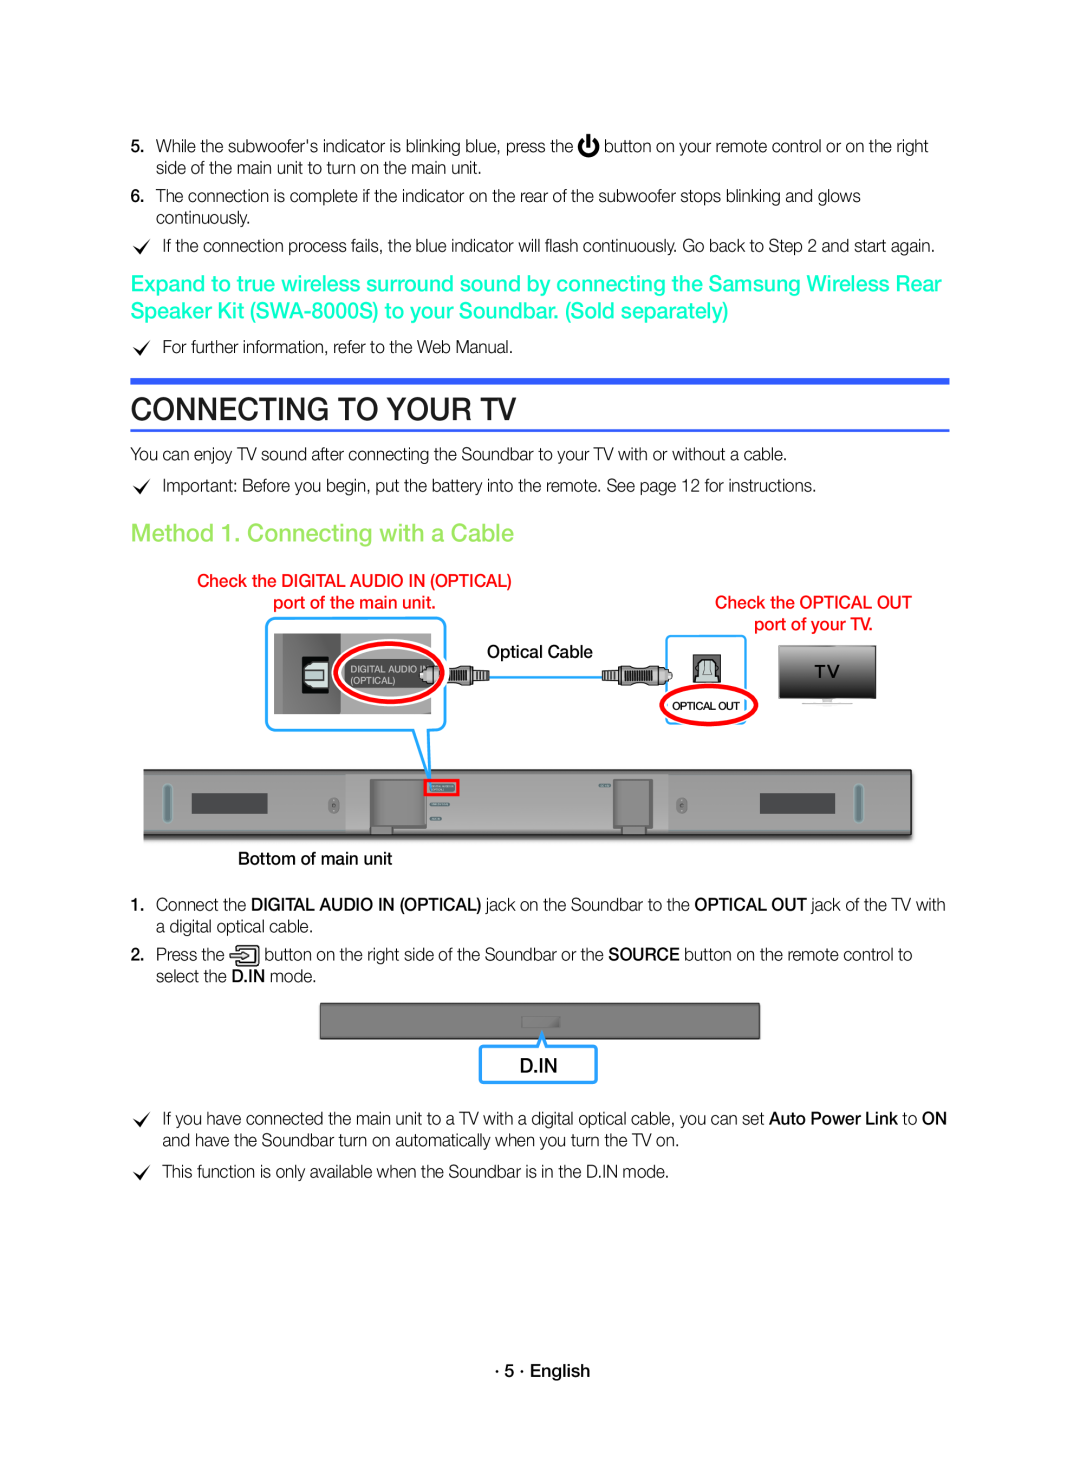 Method 1. Connecting with a Cable Standard HW-K360